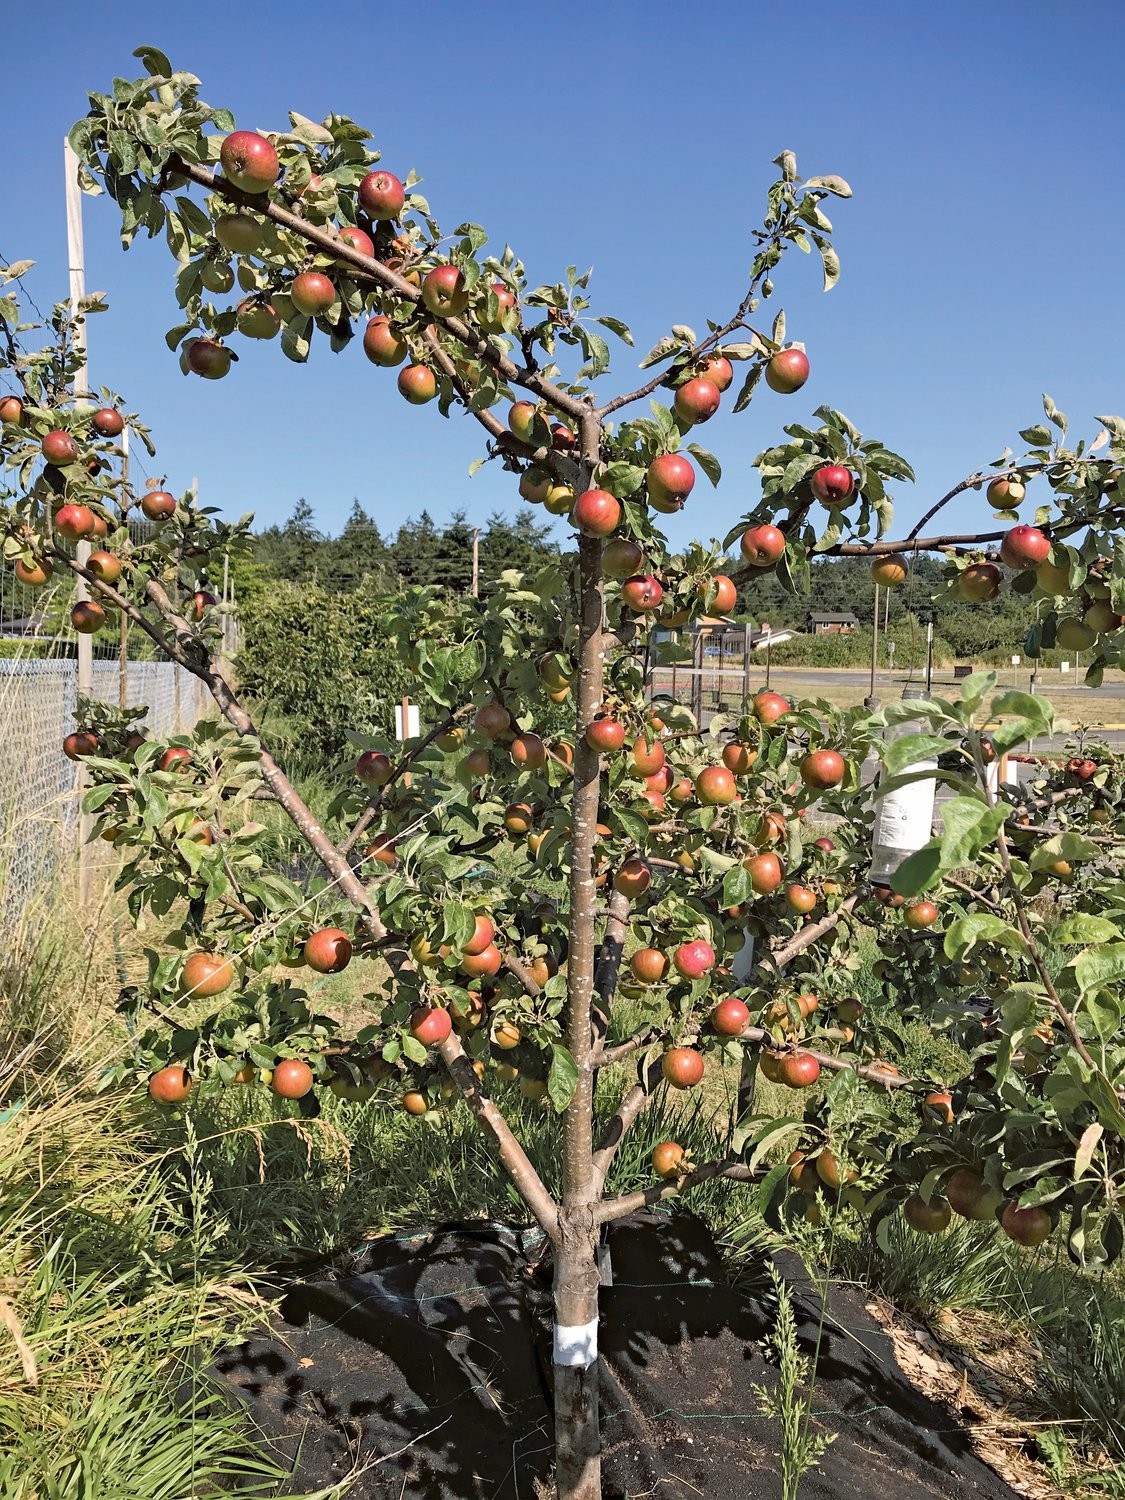 Many of the trees at the Blue Heron Orchard like this Melrose apple are pruned with an open framework, low enough for students to reach the fruit when it is ready to harvest.